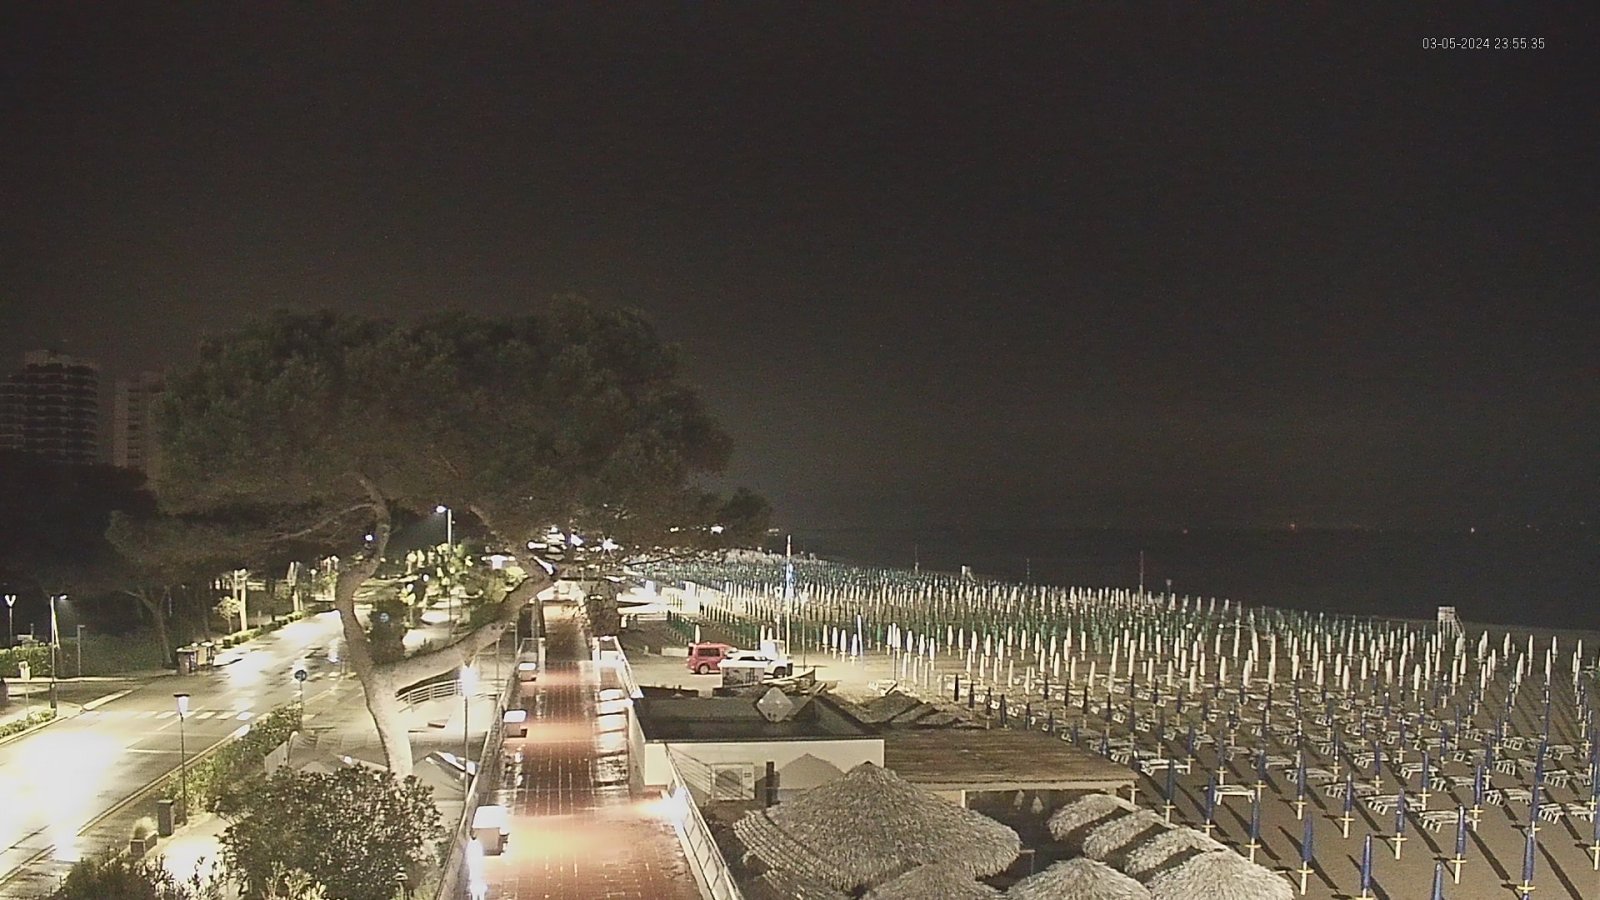 Webcam image with view of the beach and umbrellas on northeast